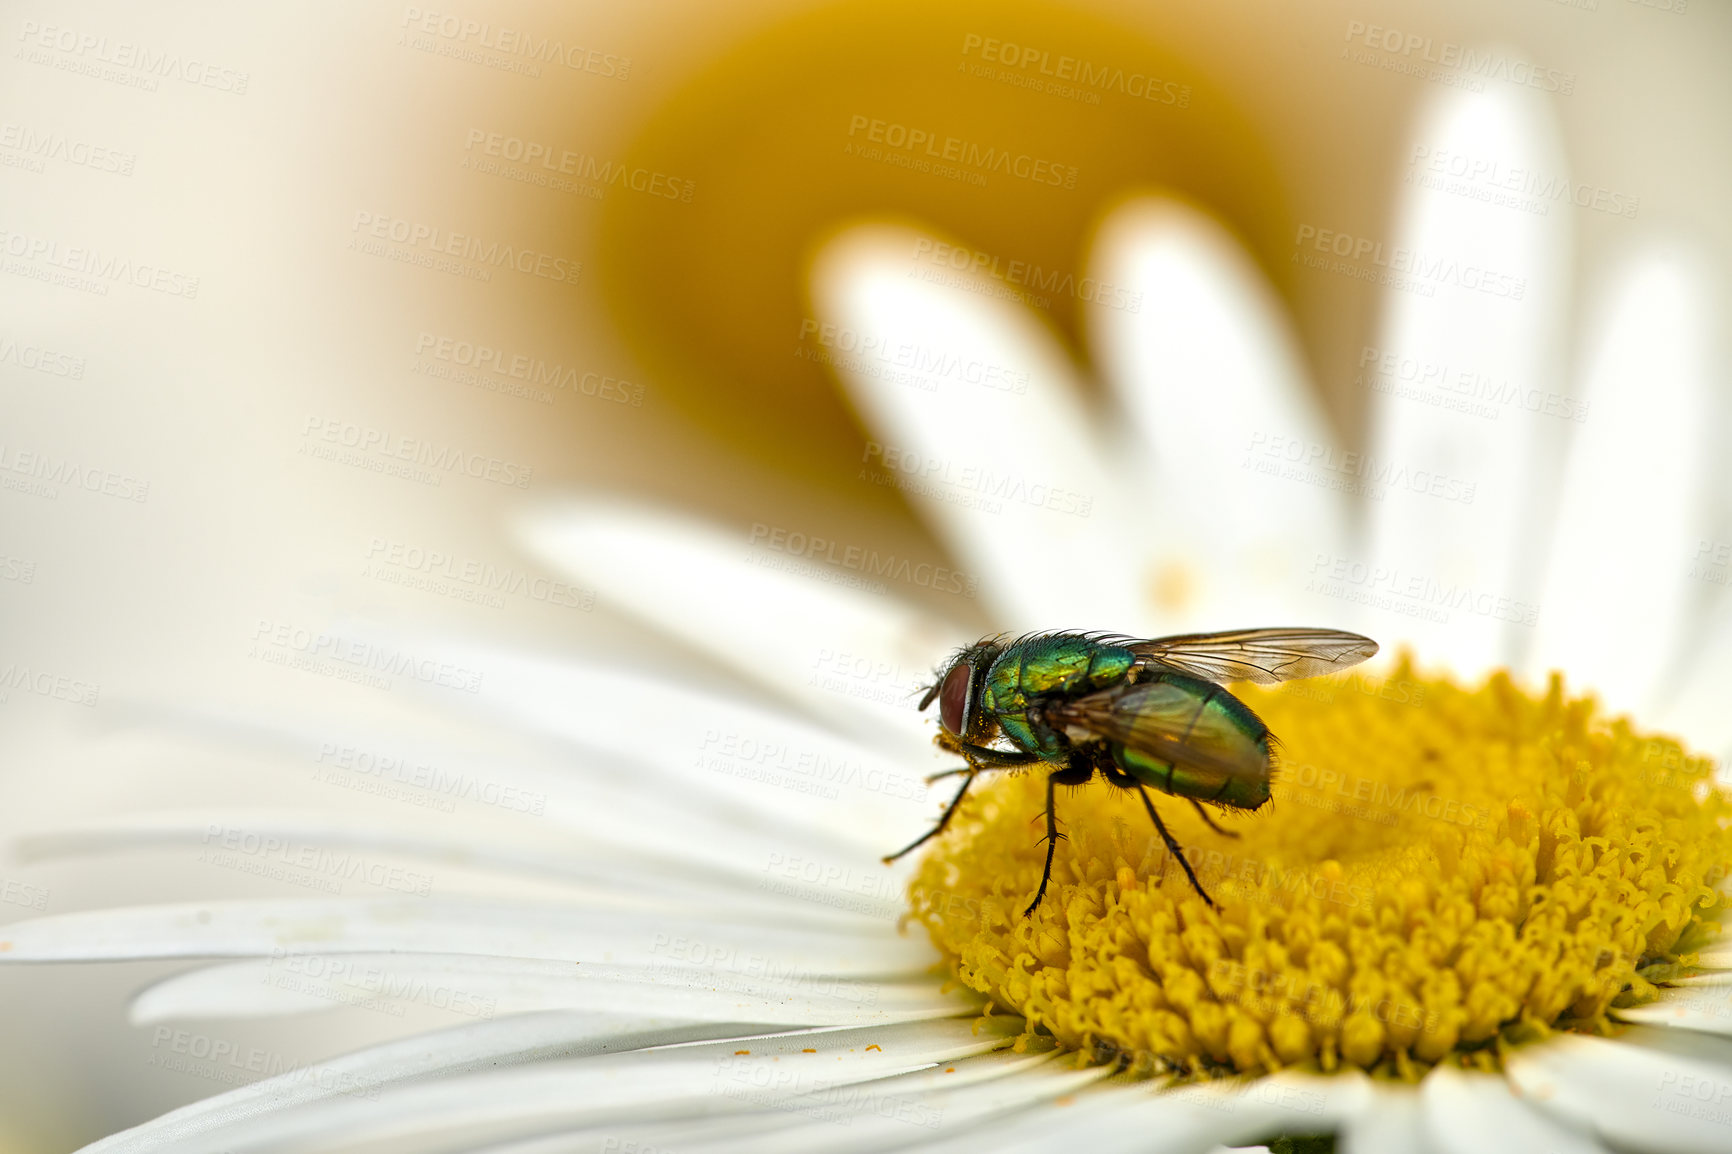 Buy stock photo Common green bottle fly pollinating a white daisy flower outdoors. Closeup of one blowfly feeding off nectar from the yellow pistil on a marguerite plant. Macro of a sericata insect in an ecosystem